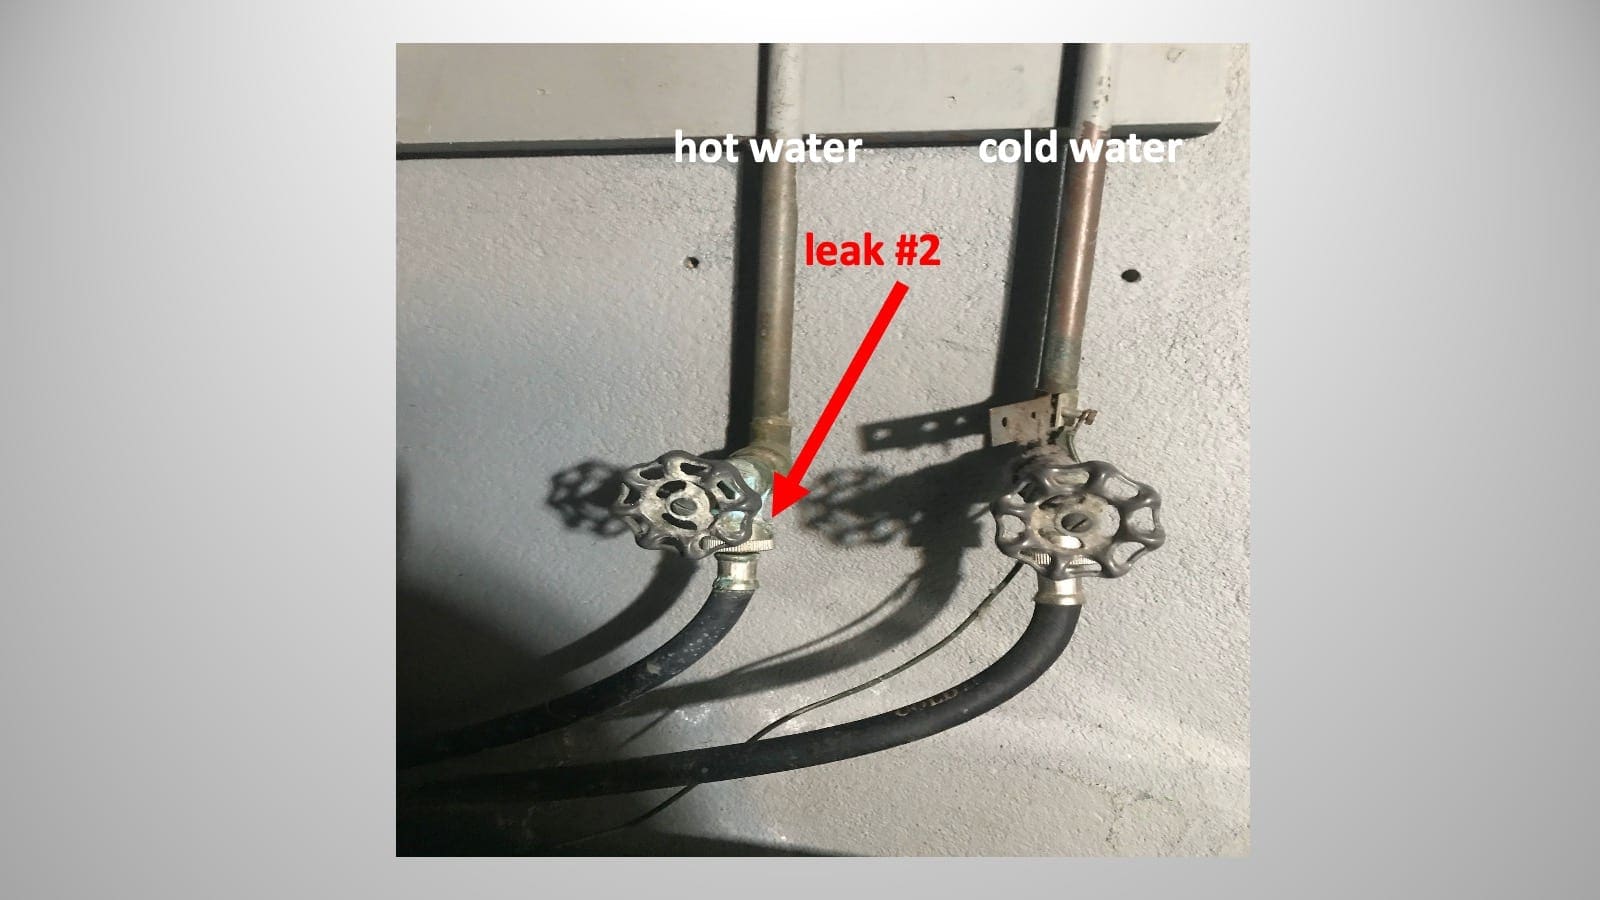 A picture of a water hose with a red arrow pointing to it.